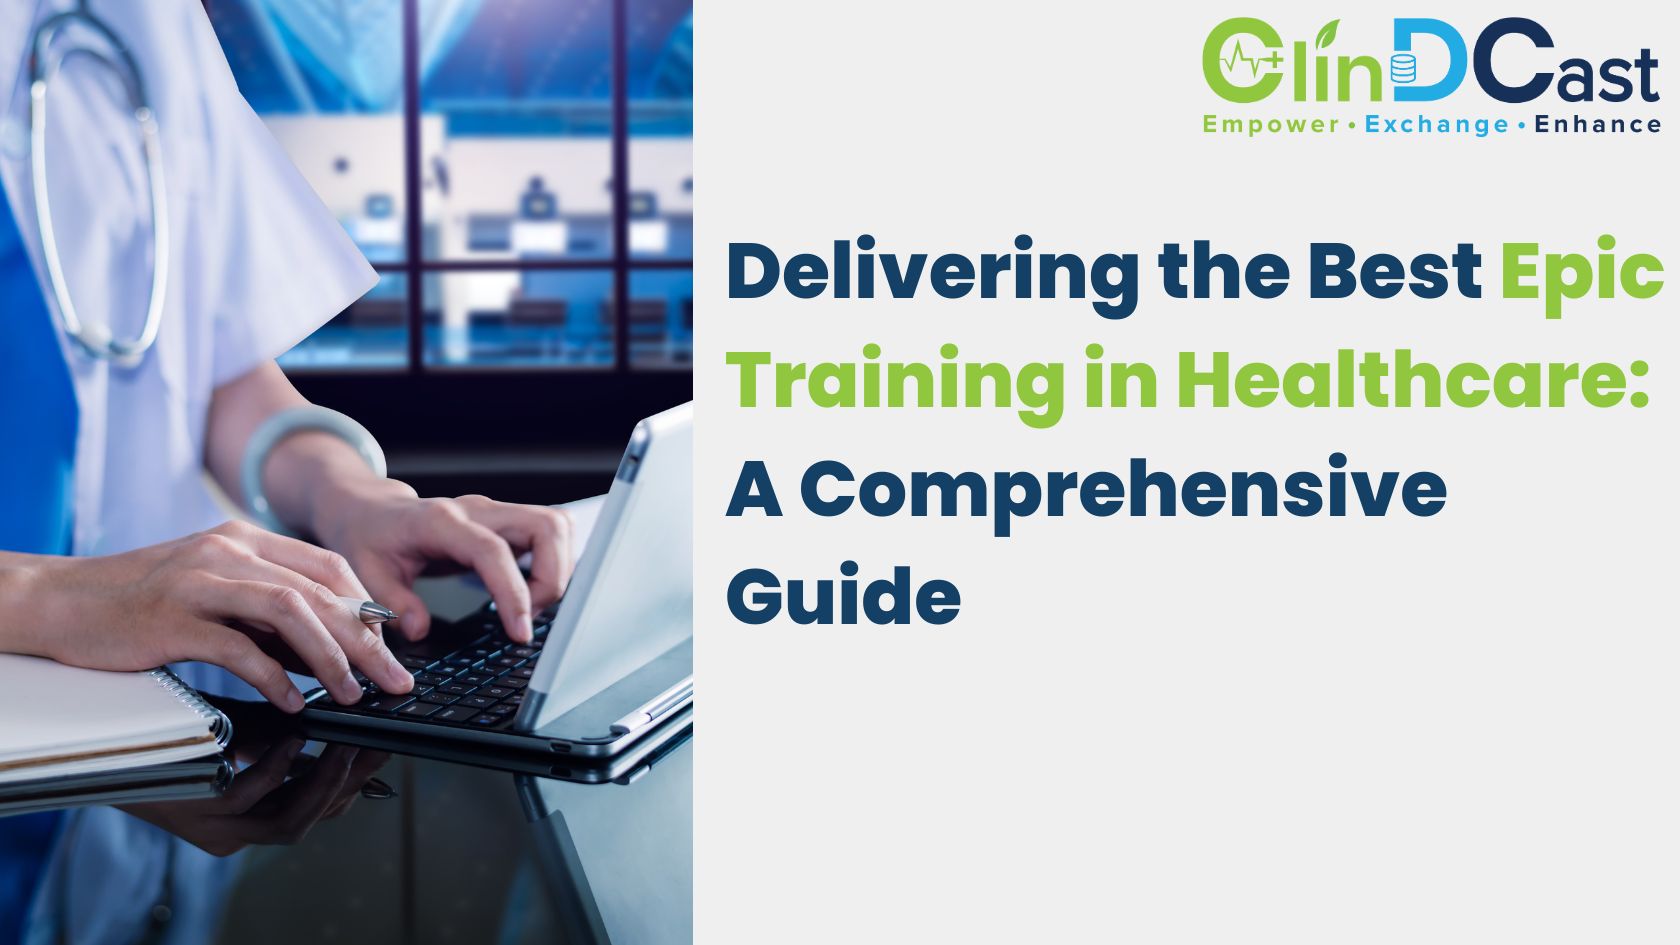 How to Deliver the Best Epic Training in Healthcare